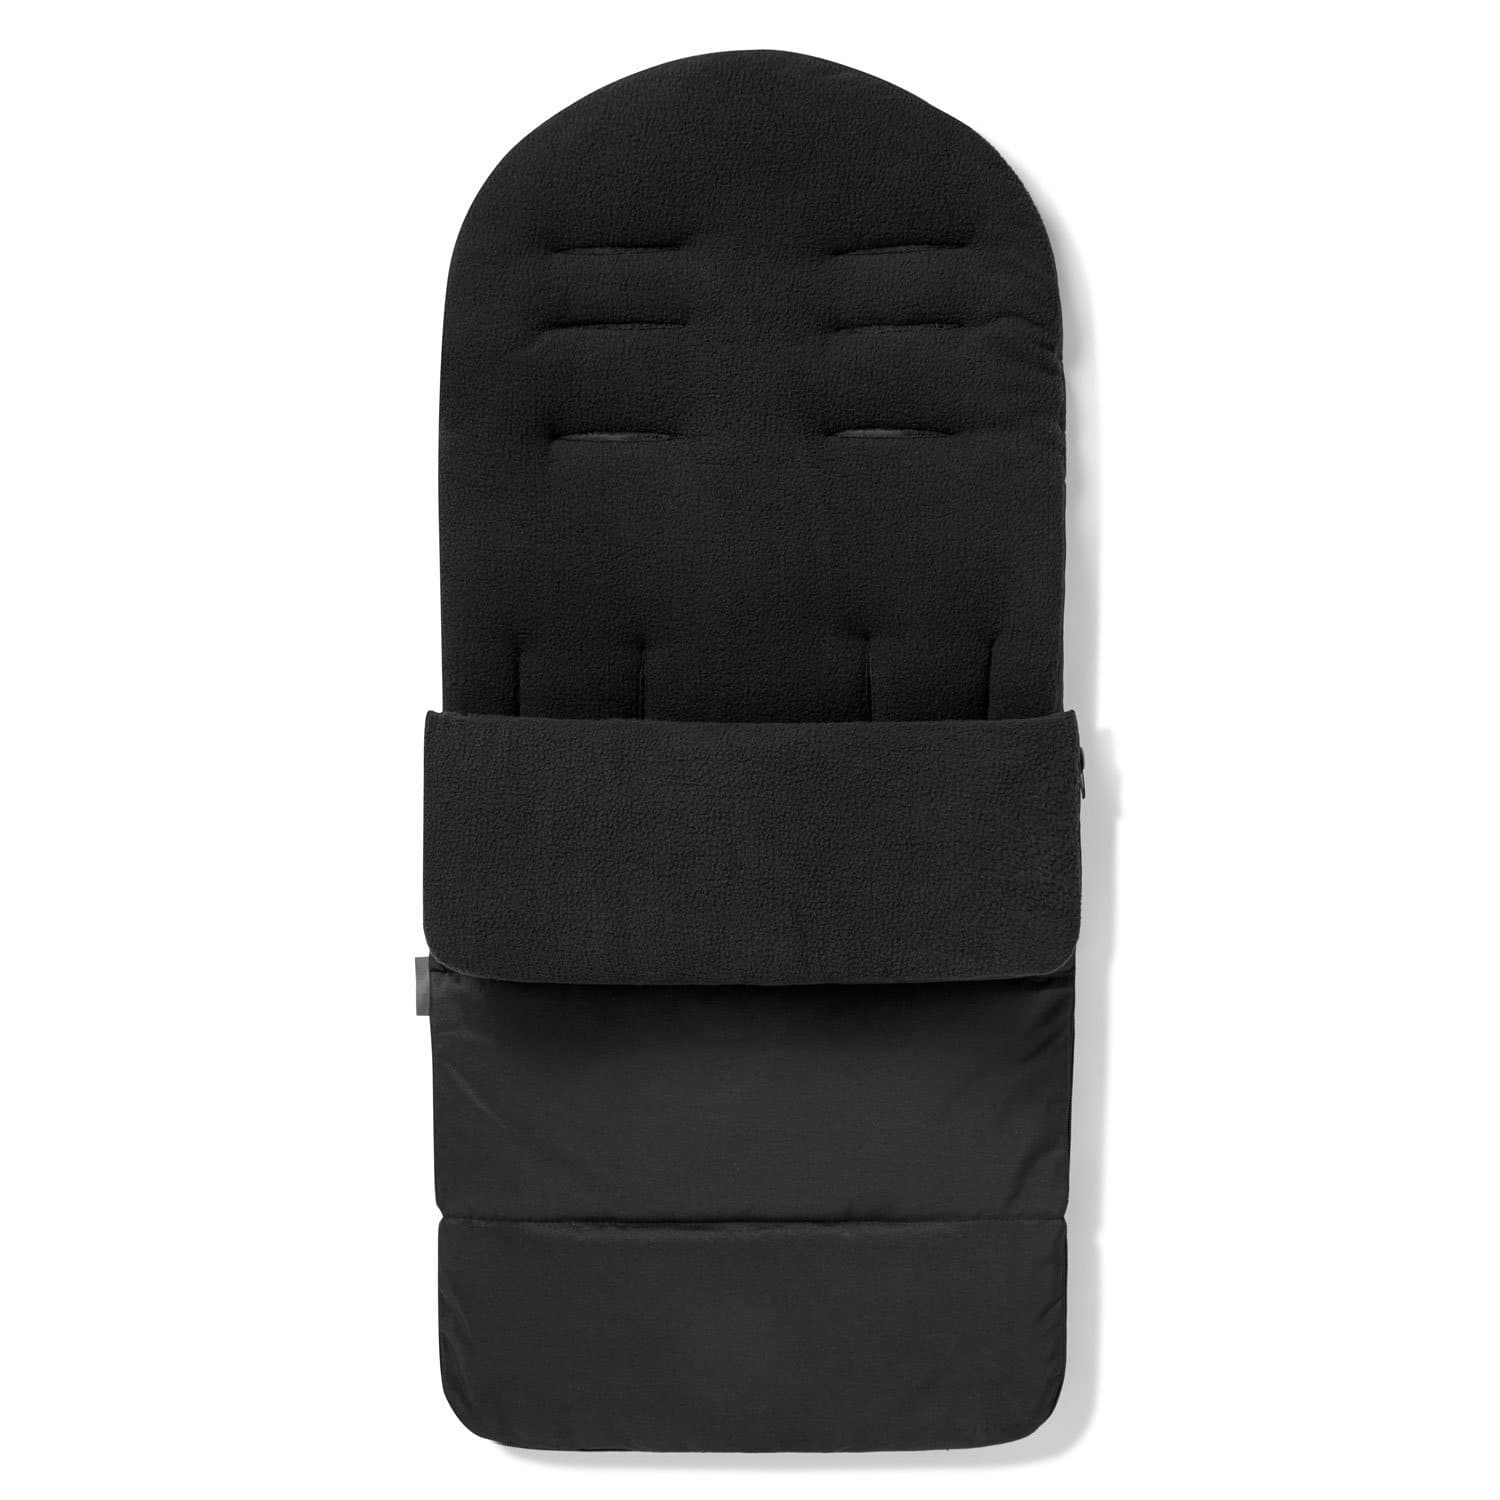 Premium Footmuff / Cosy Toes Compatible with Combi - Black Jack / Fits All Models | For Your Little One